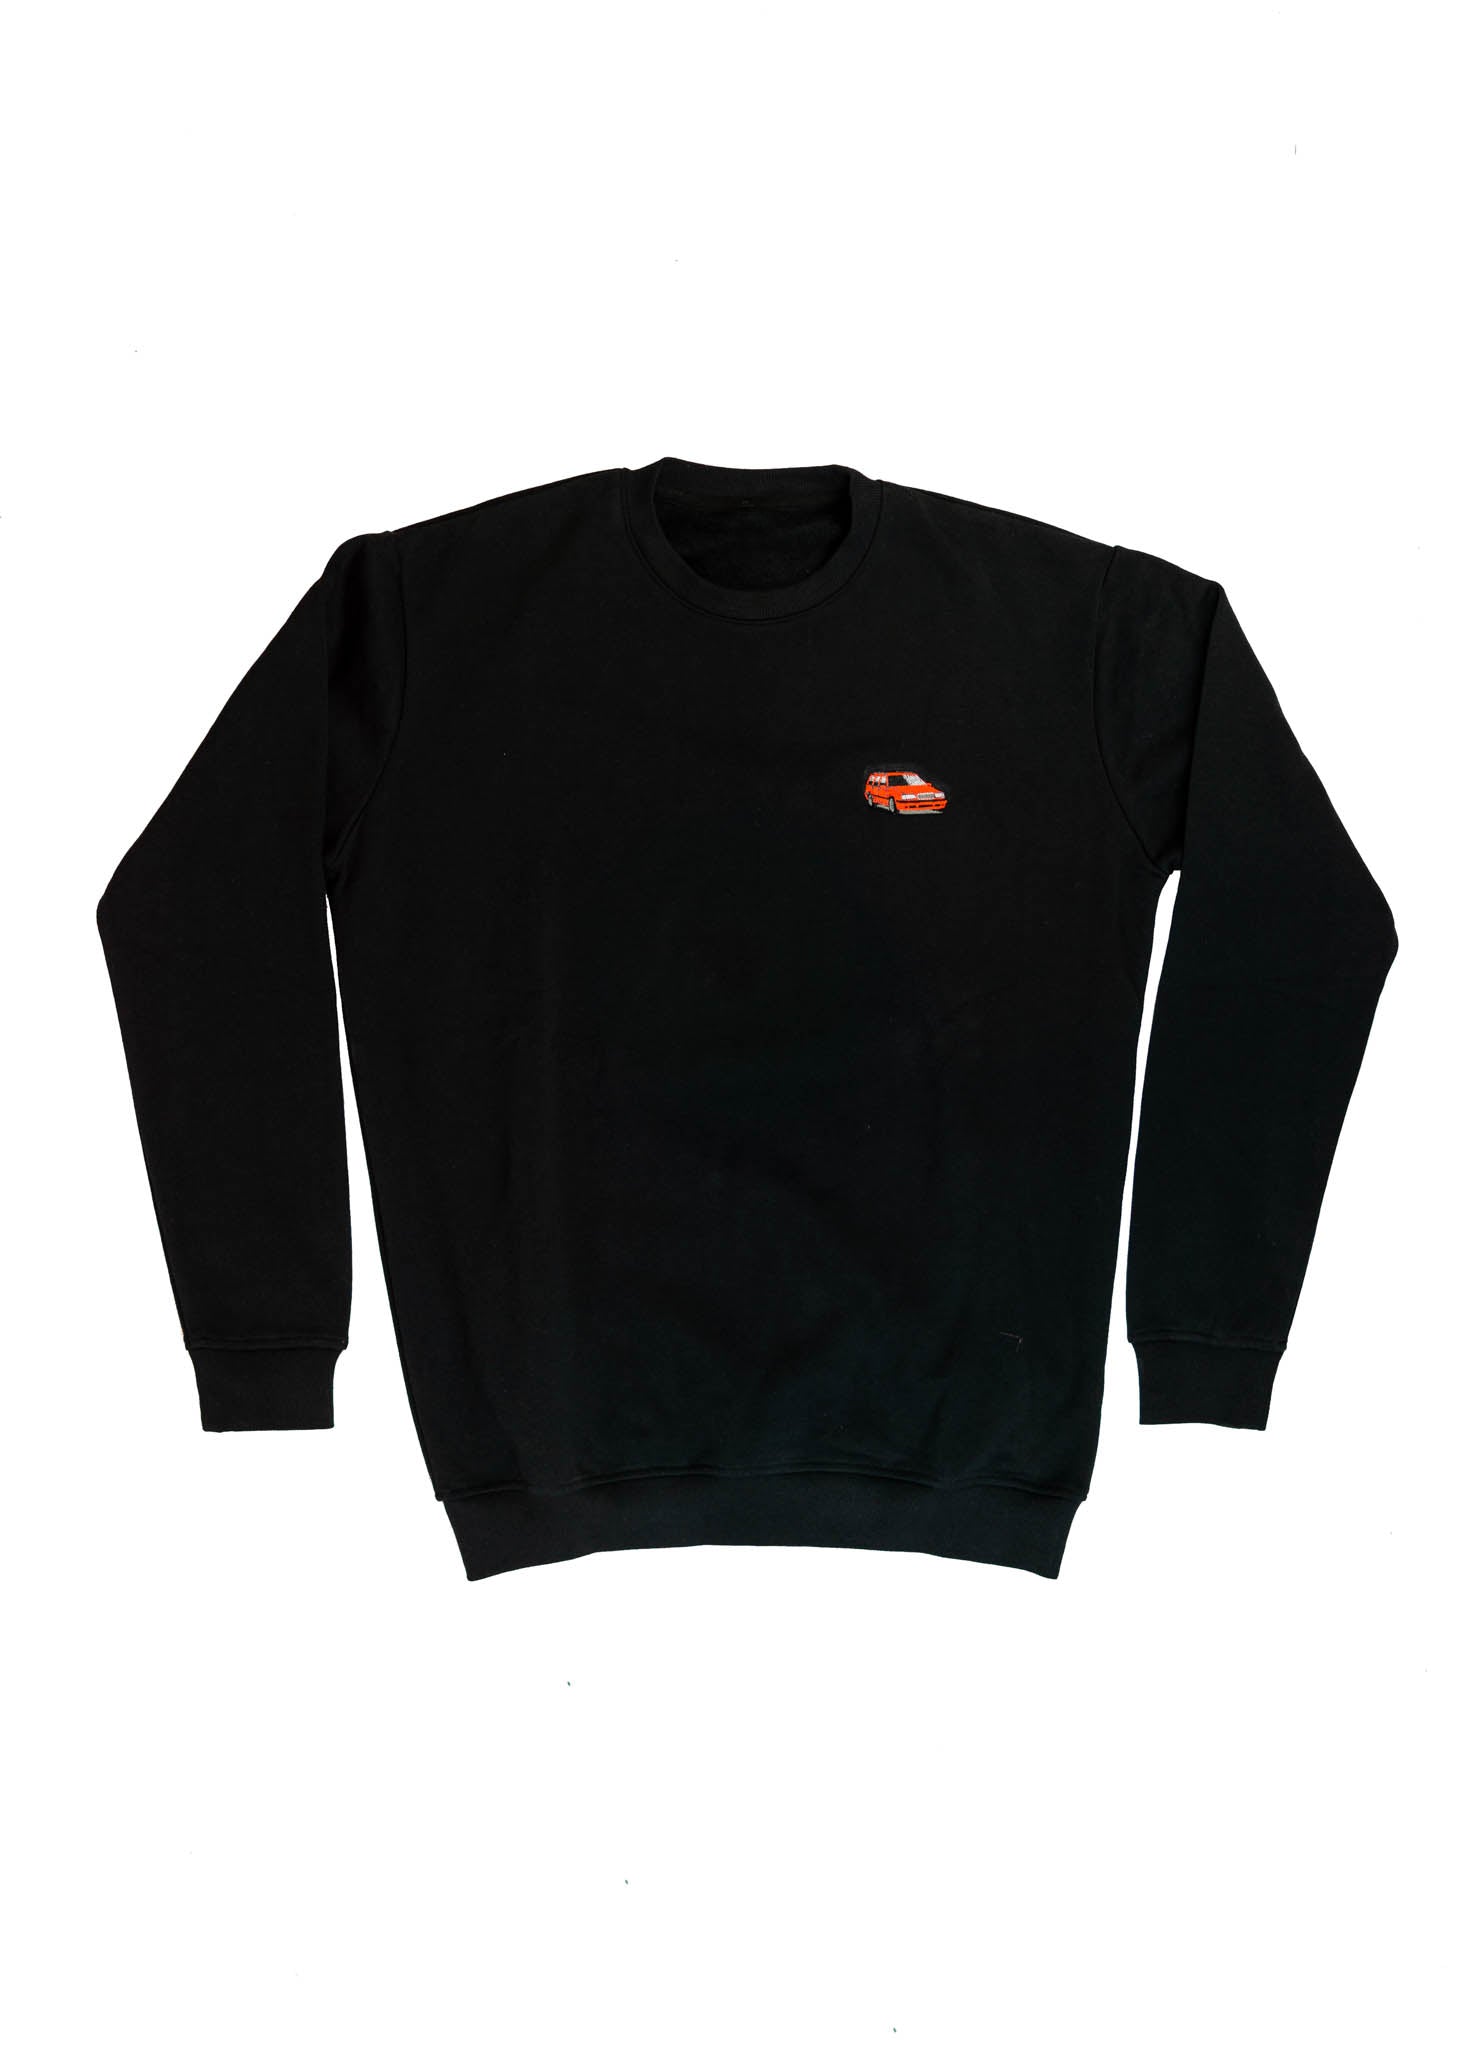 A black Volvo crewneck sweater for men. Photo is the front of the sweater with an embroidered 850R. Fabric is composed of high quality 80% cotton, and 20% polyester and fits to size. The style is long sleeve, crew neck, and embroidery on left chest.